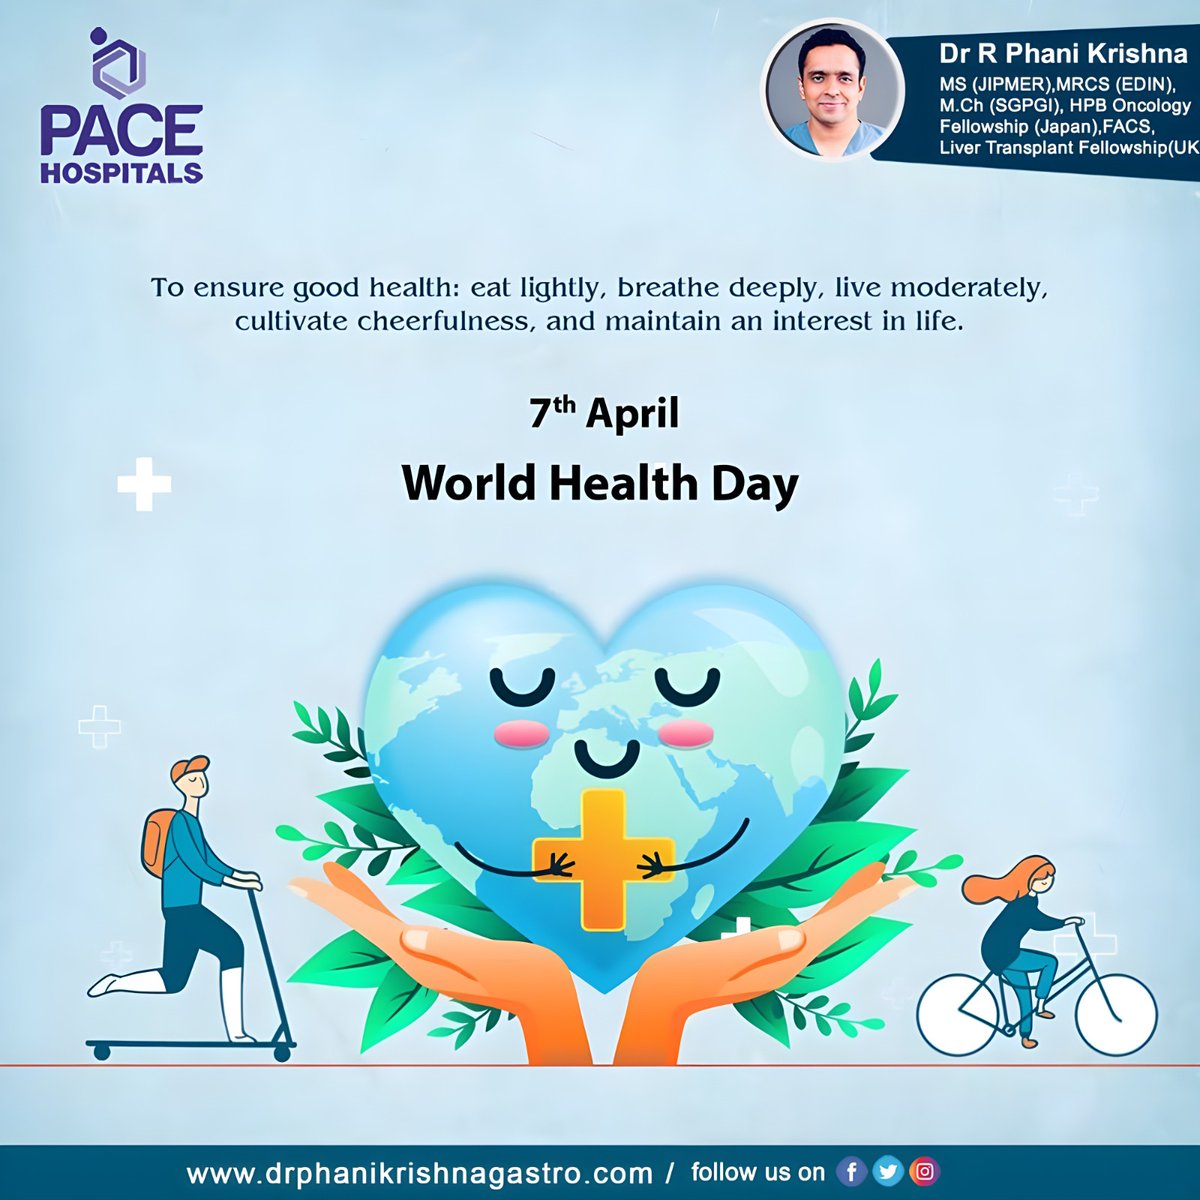 'On World Health Day, let's unite for a healthier tomorrow.'

#HealthForAll #PreventionIsKey #QualityCareForAll #DoctorsSaveLives #GlobalHealthHeroes #HealthyCommunities #EquitableAccess #WellnessWednesday #PublicHealthMatters 

drphanikrishnagastro.com